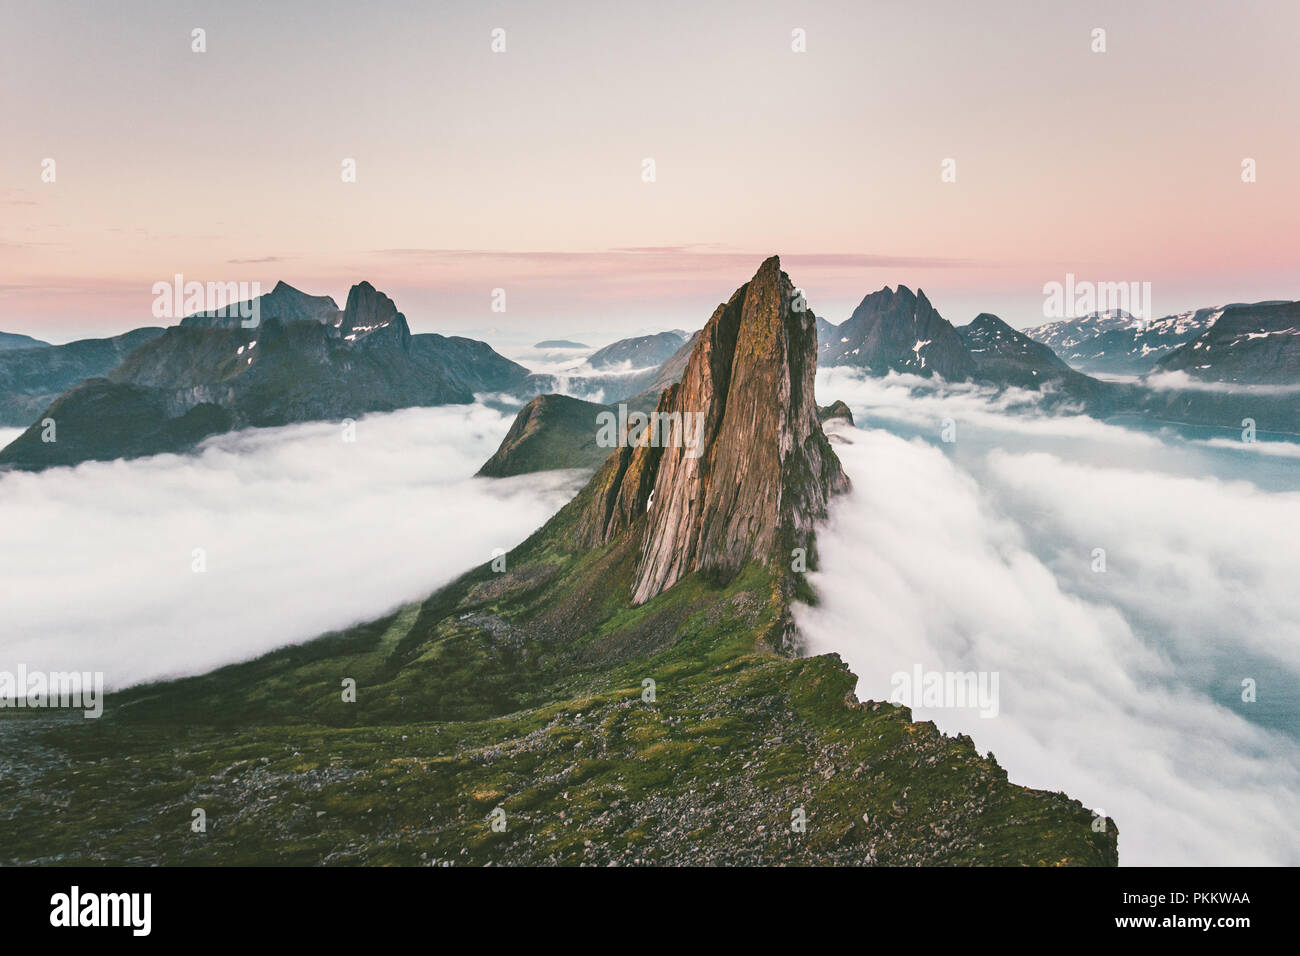 Segla Mountain rocky peak Landscape over clouds and fjord aerial view in Norway Travel destinations awesome scenery Senja islands Stock Photo